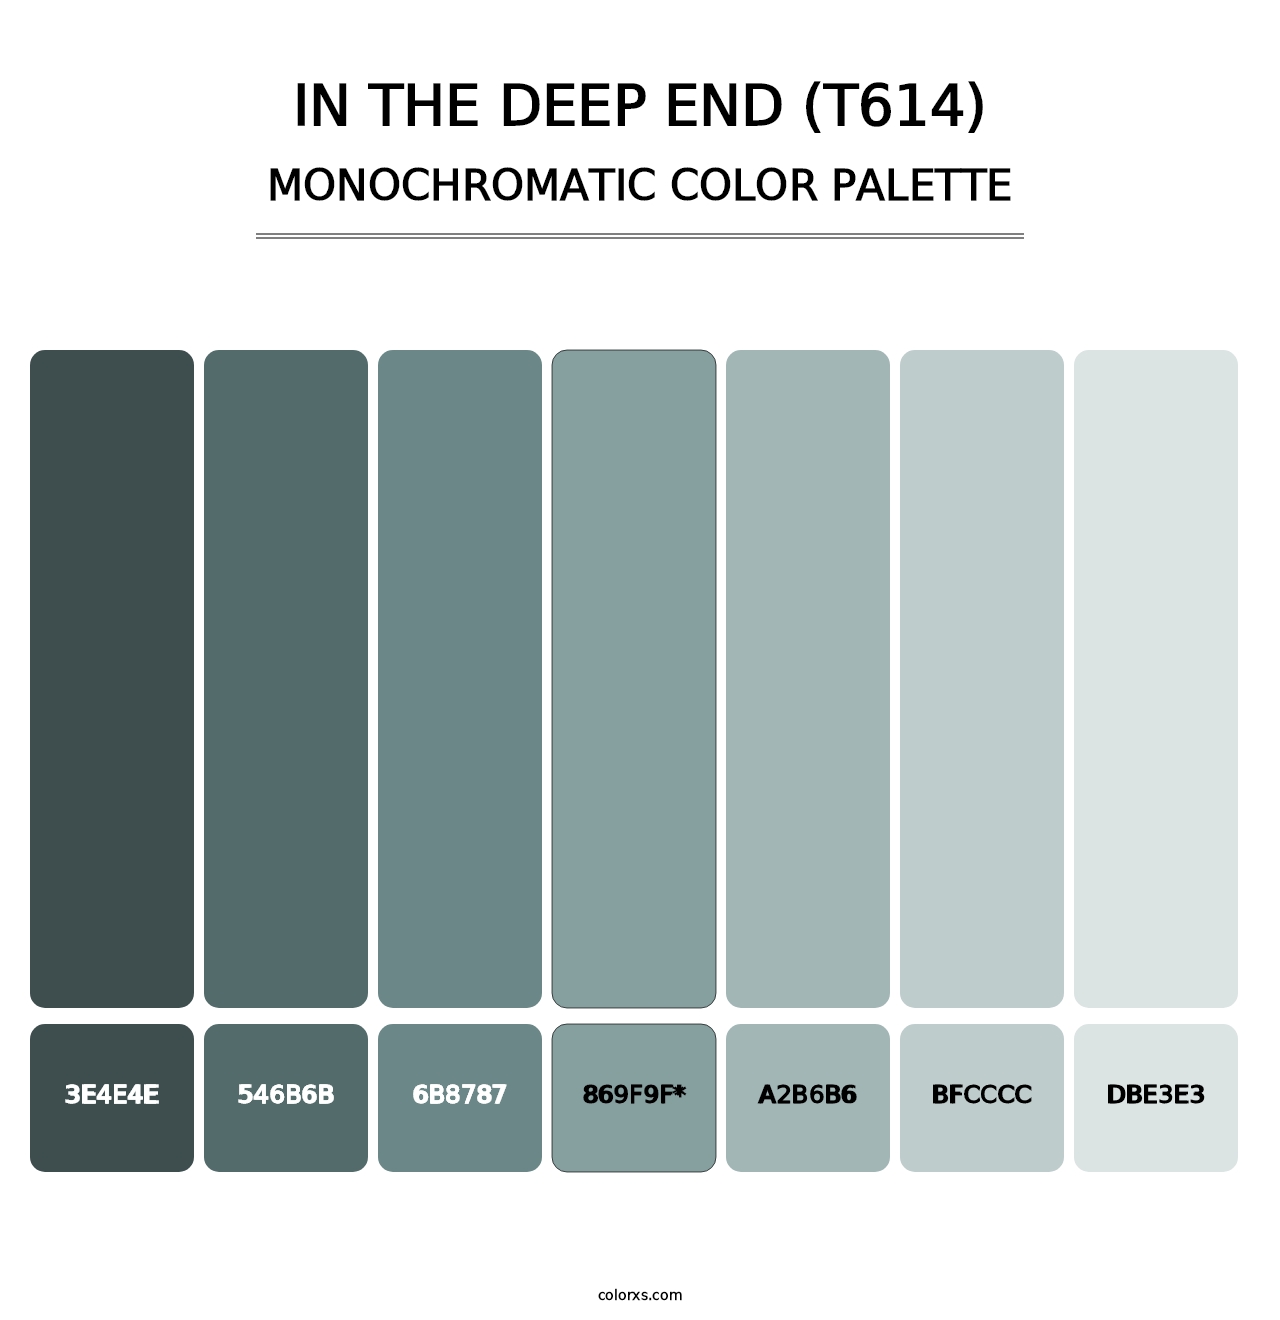 In the Deep End (T614) - Monochromatic Color Palette